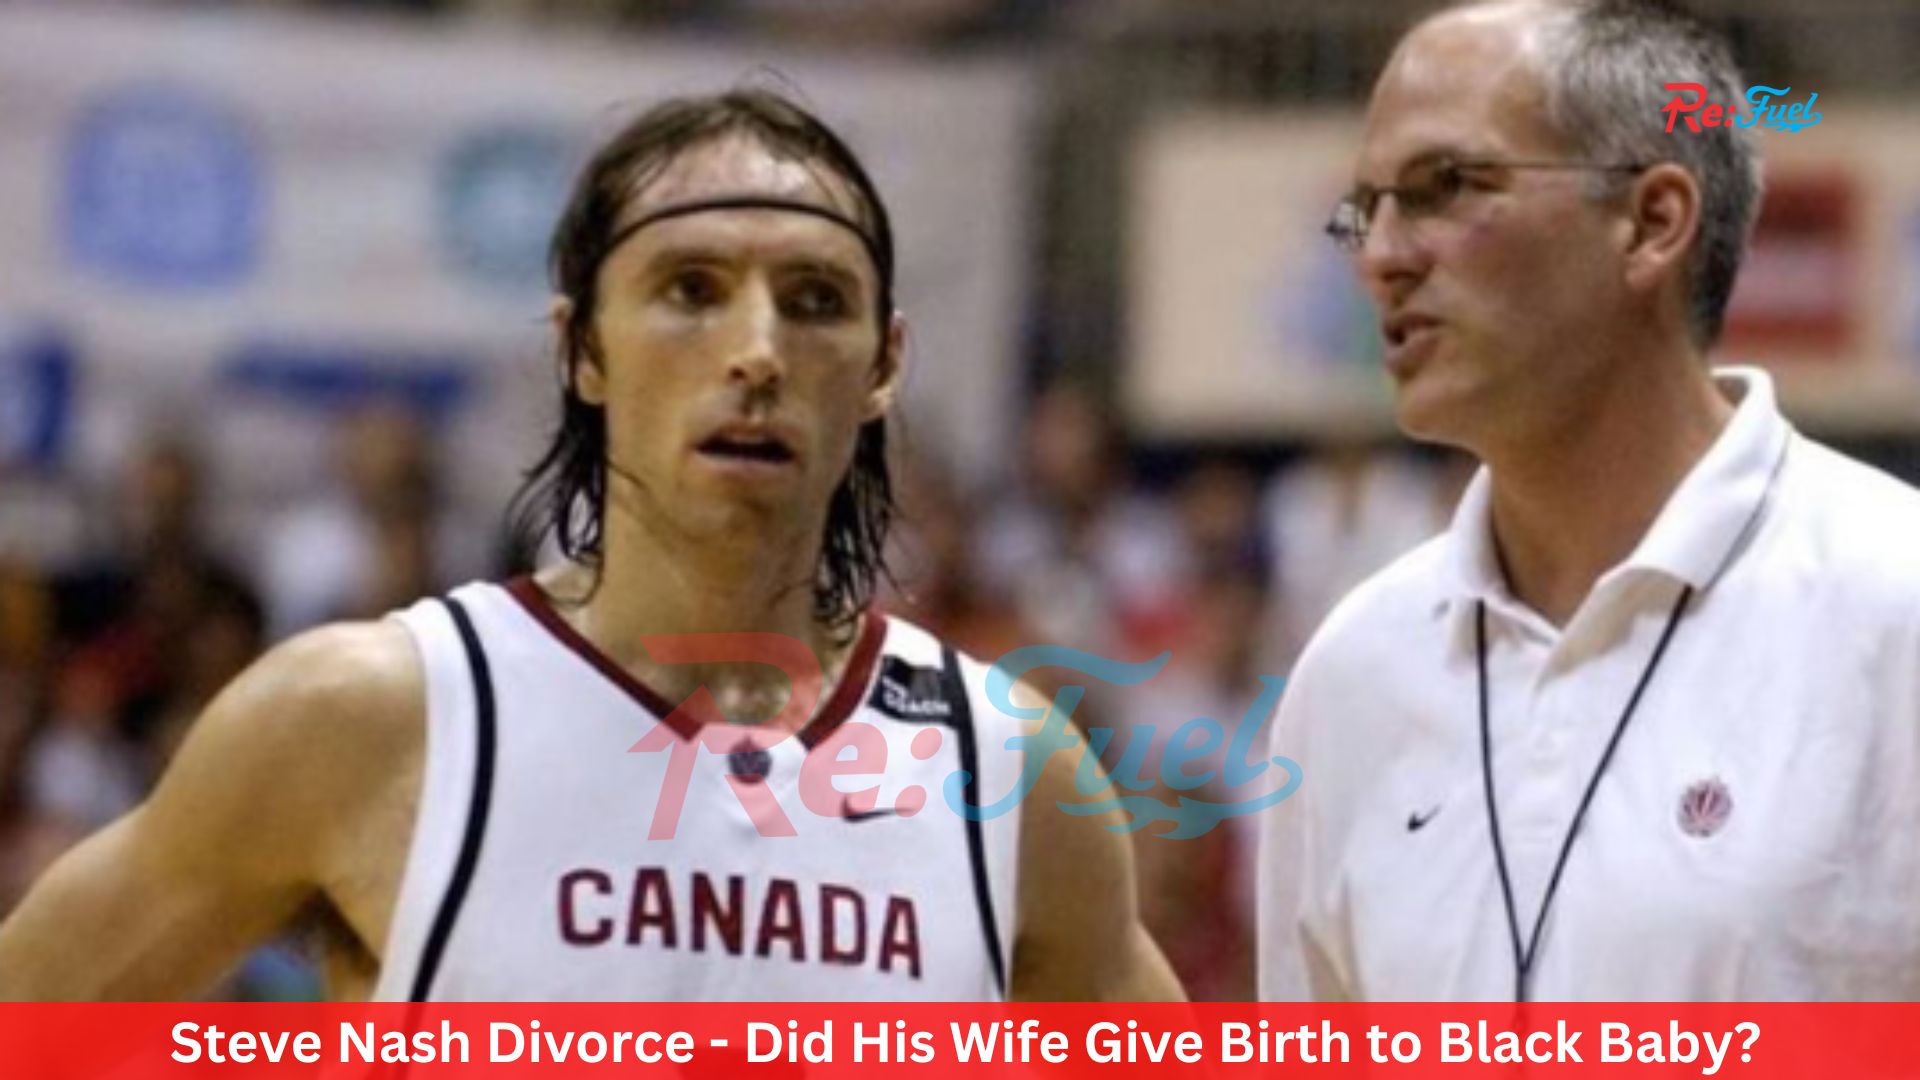 Steve Nash Divorce - Did His Wife Give Birth to Black Baby?